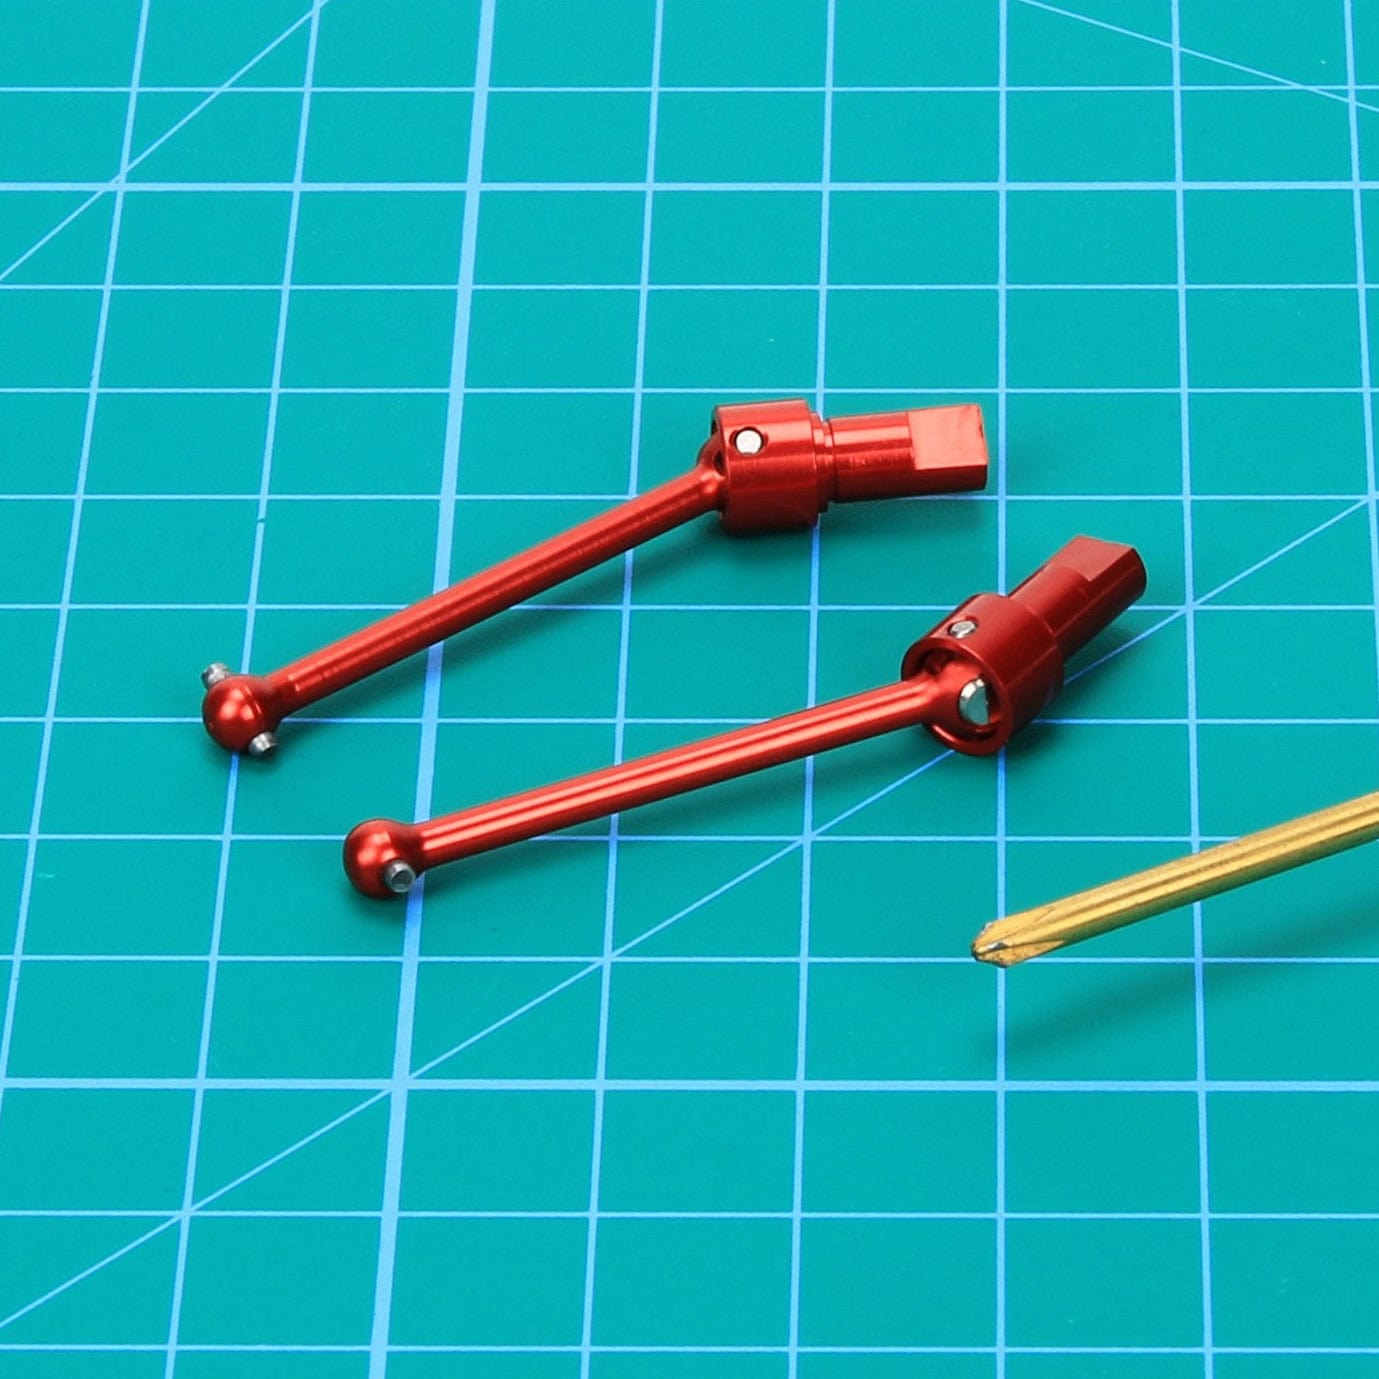 RCAWD Traxxas Latrax Red / A set RCAWD Aluminium Front Rear Driveshaft Assembly for 1/18 Traxxas Latrax Upgrades